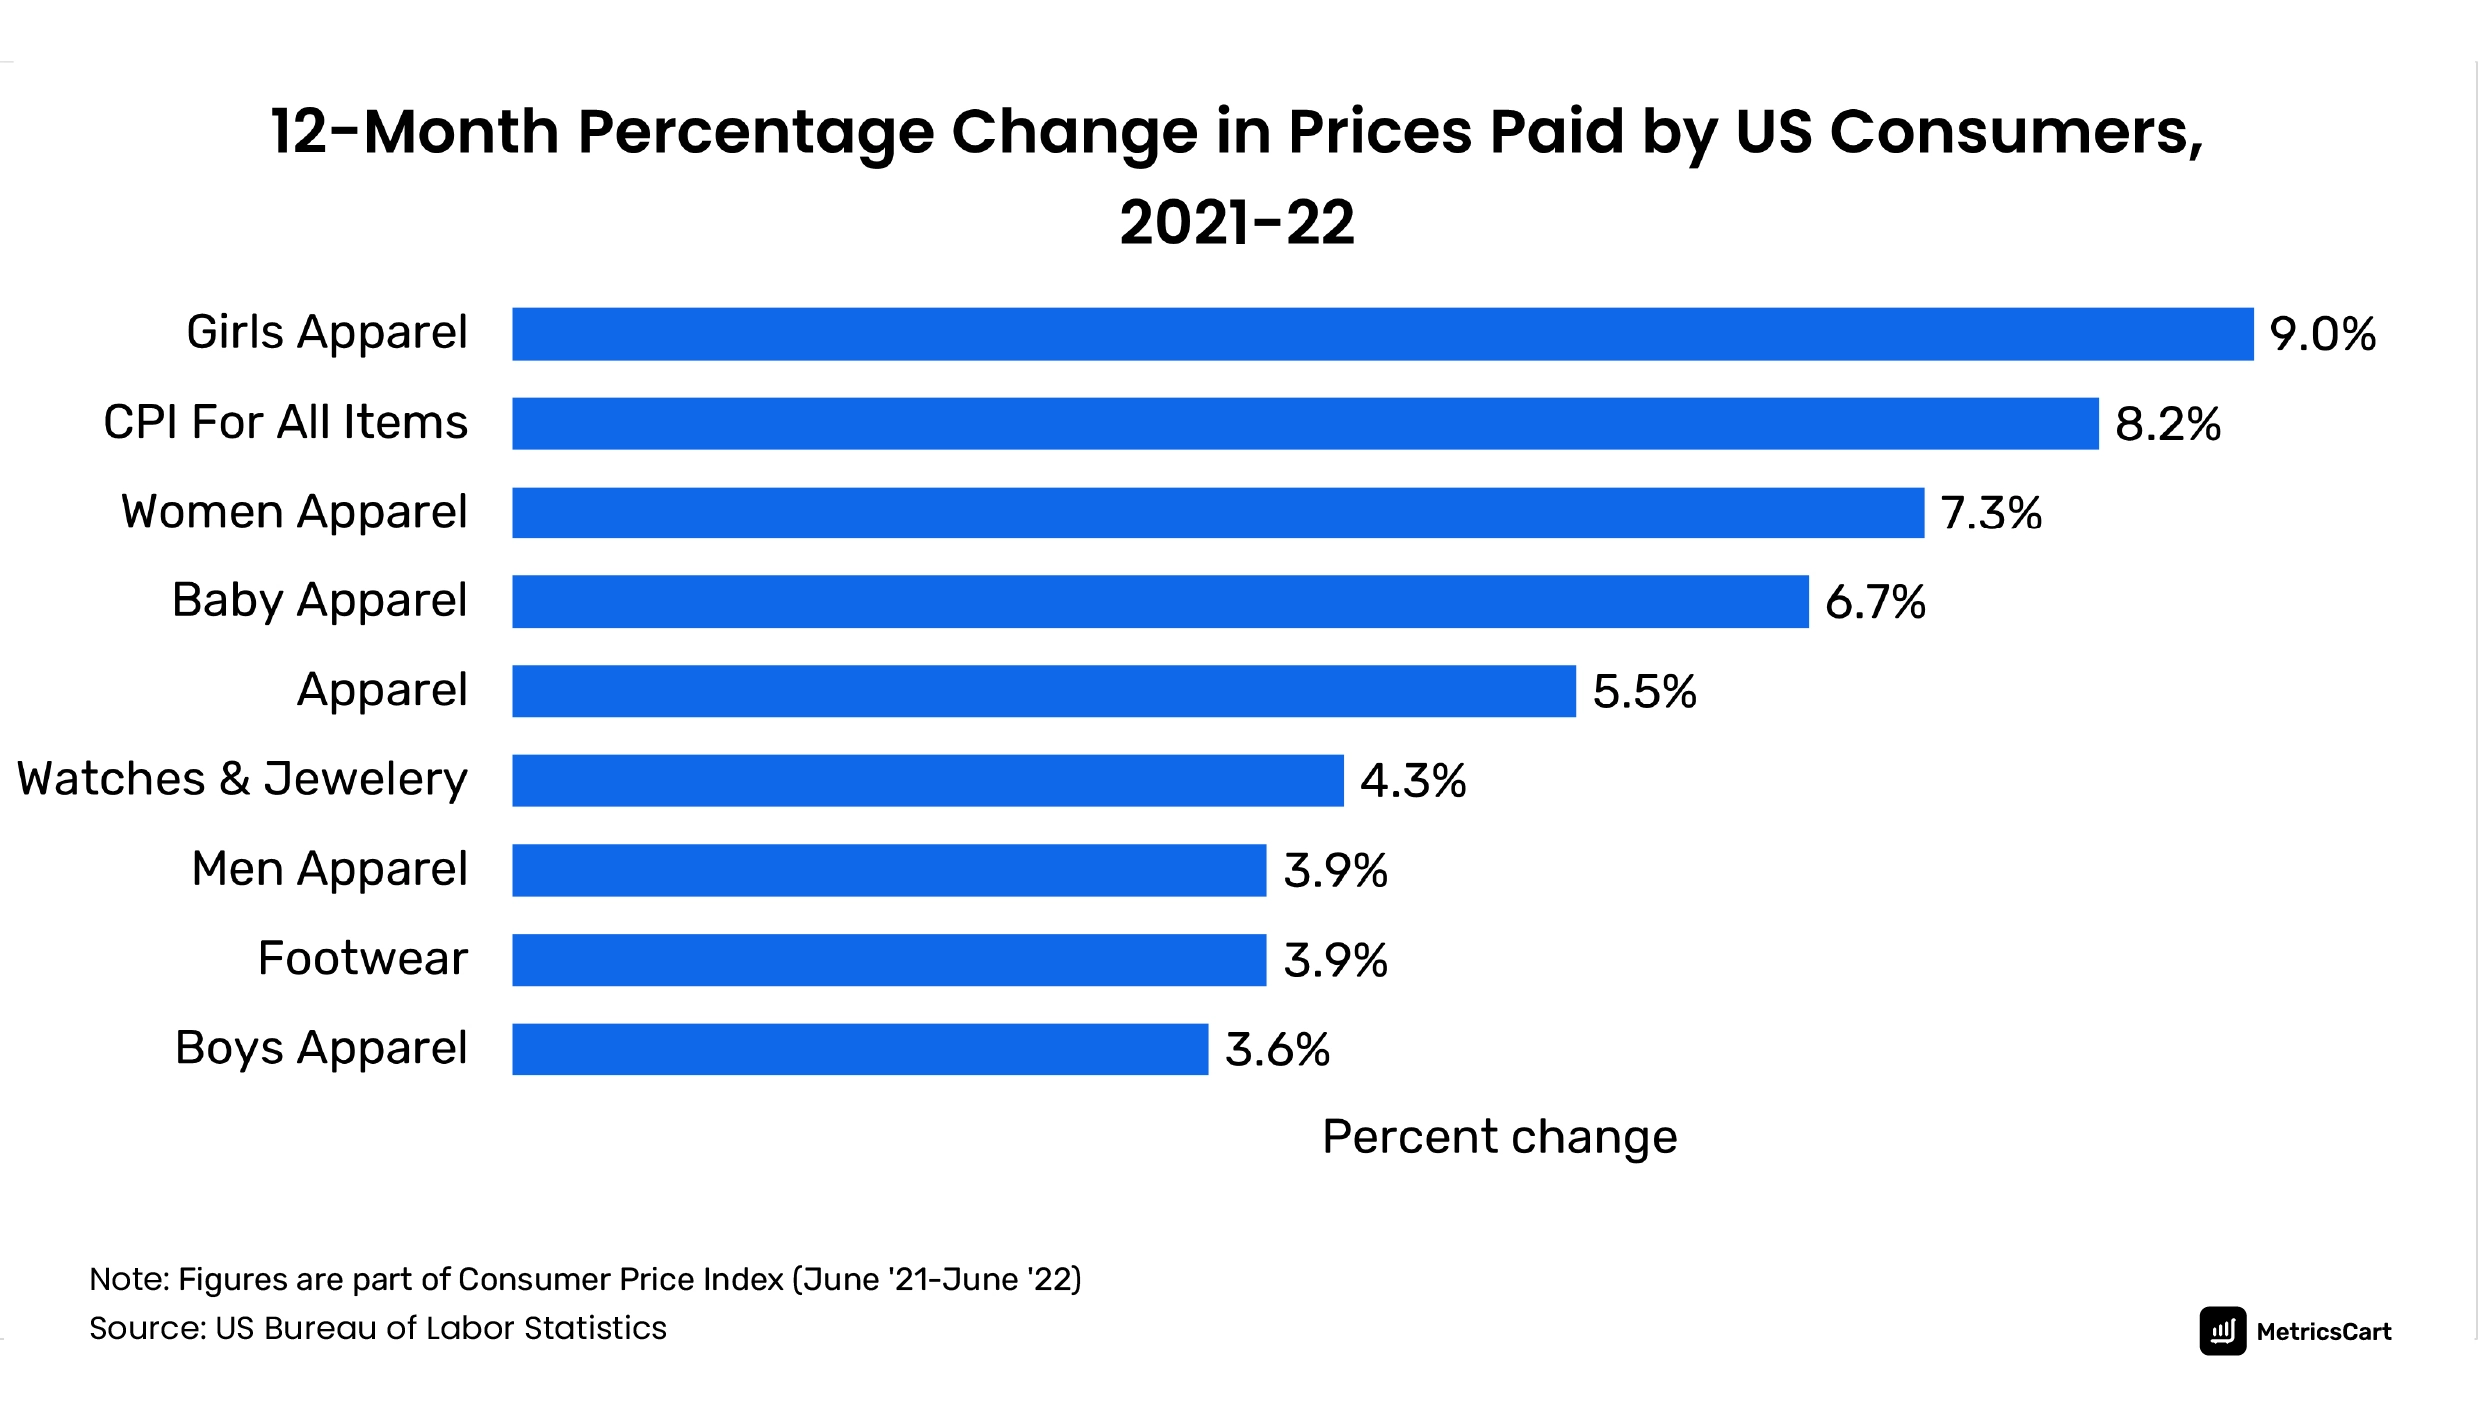 chart showing 12-month percent change in prices paid by US consumers